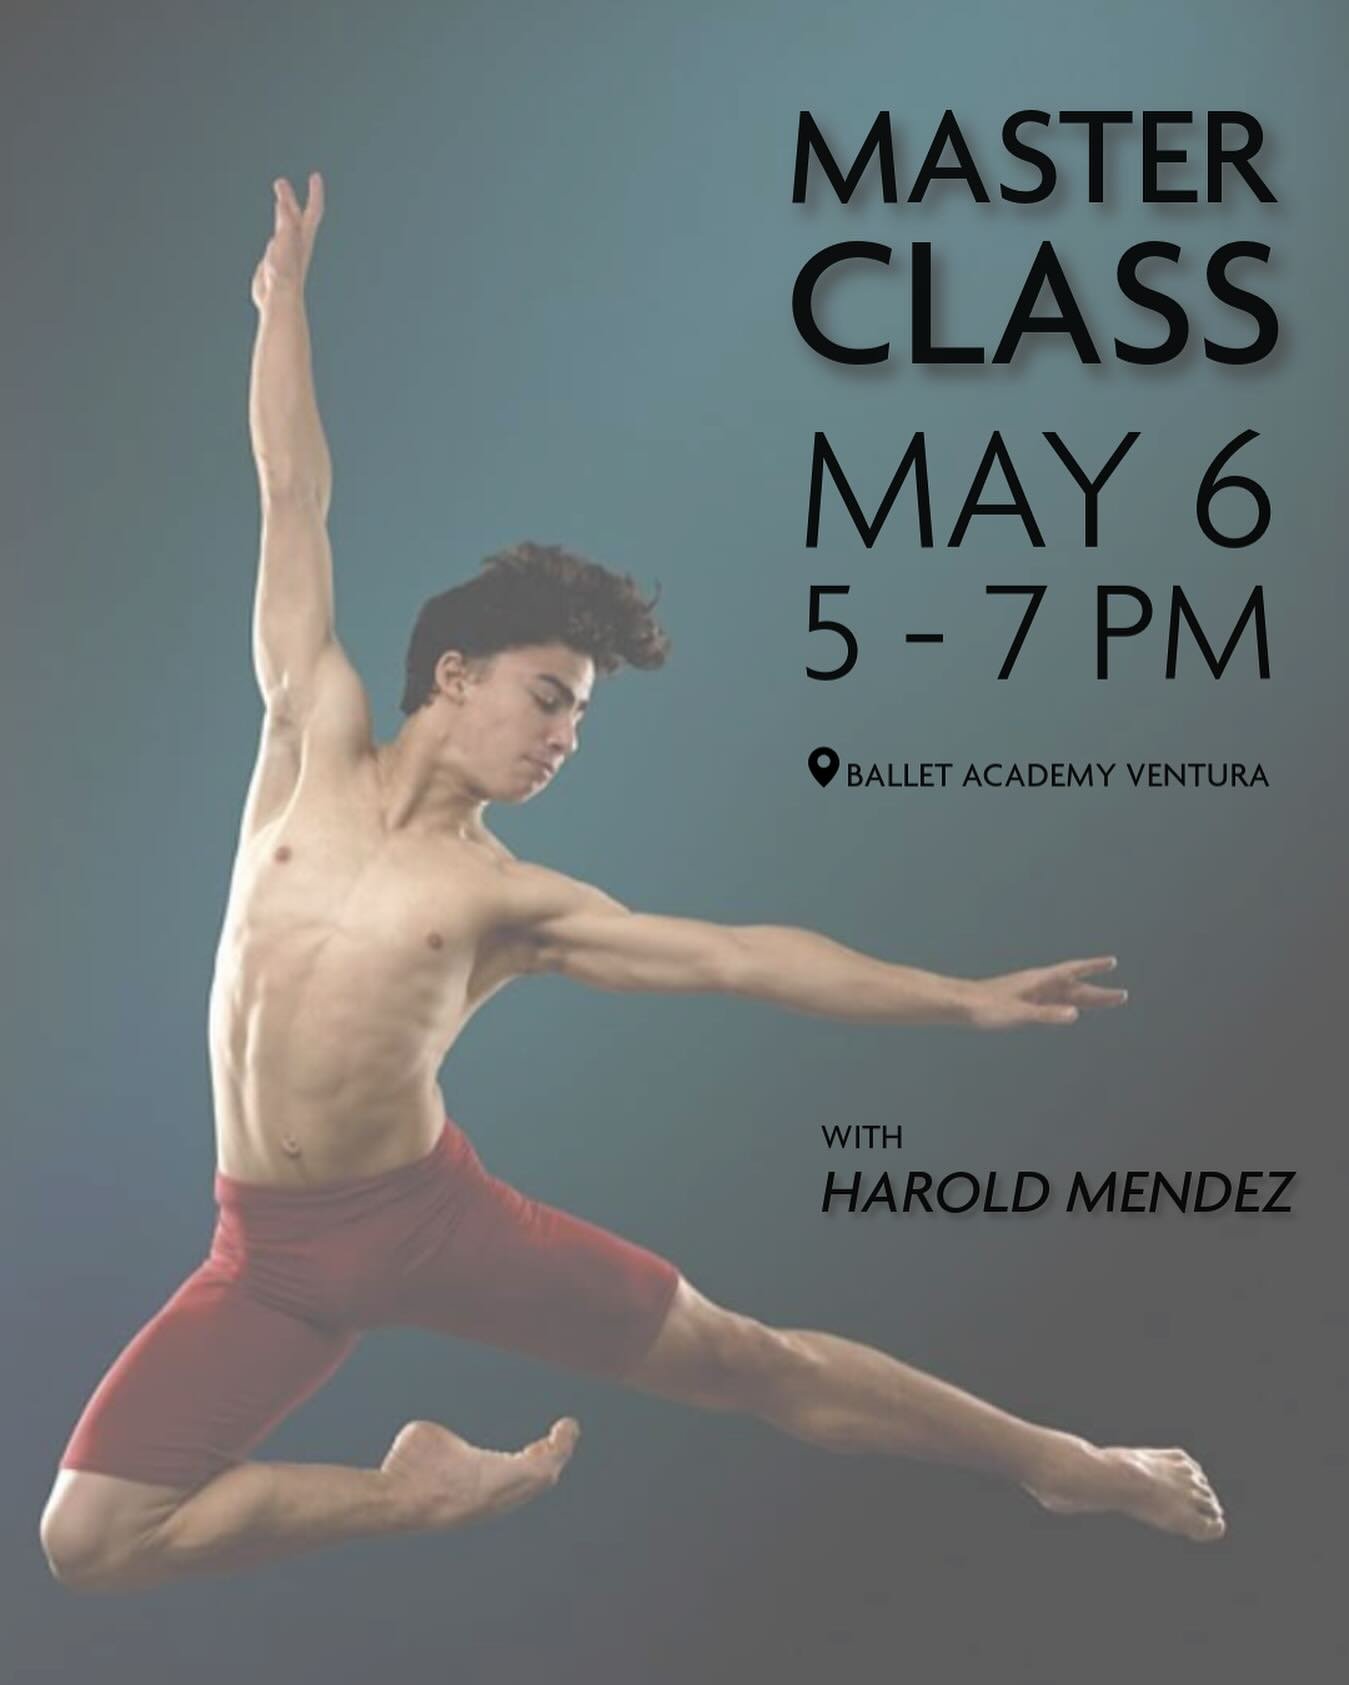 Join Ballet Academy Ventura advanced dancers, at the school of Ventura County Ballet, for an open master class with Harold Mendez on Monday, May 6 from 5-7 PM. 
📍@balletacademy_ventura
Learn more about Harold and sign up online at balletacademyventu